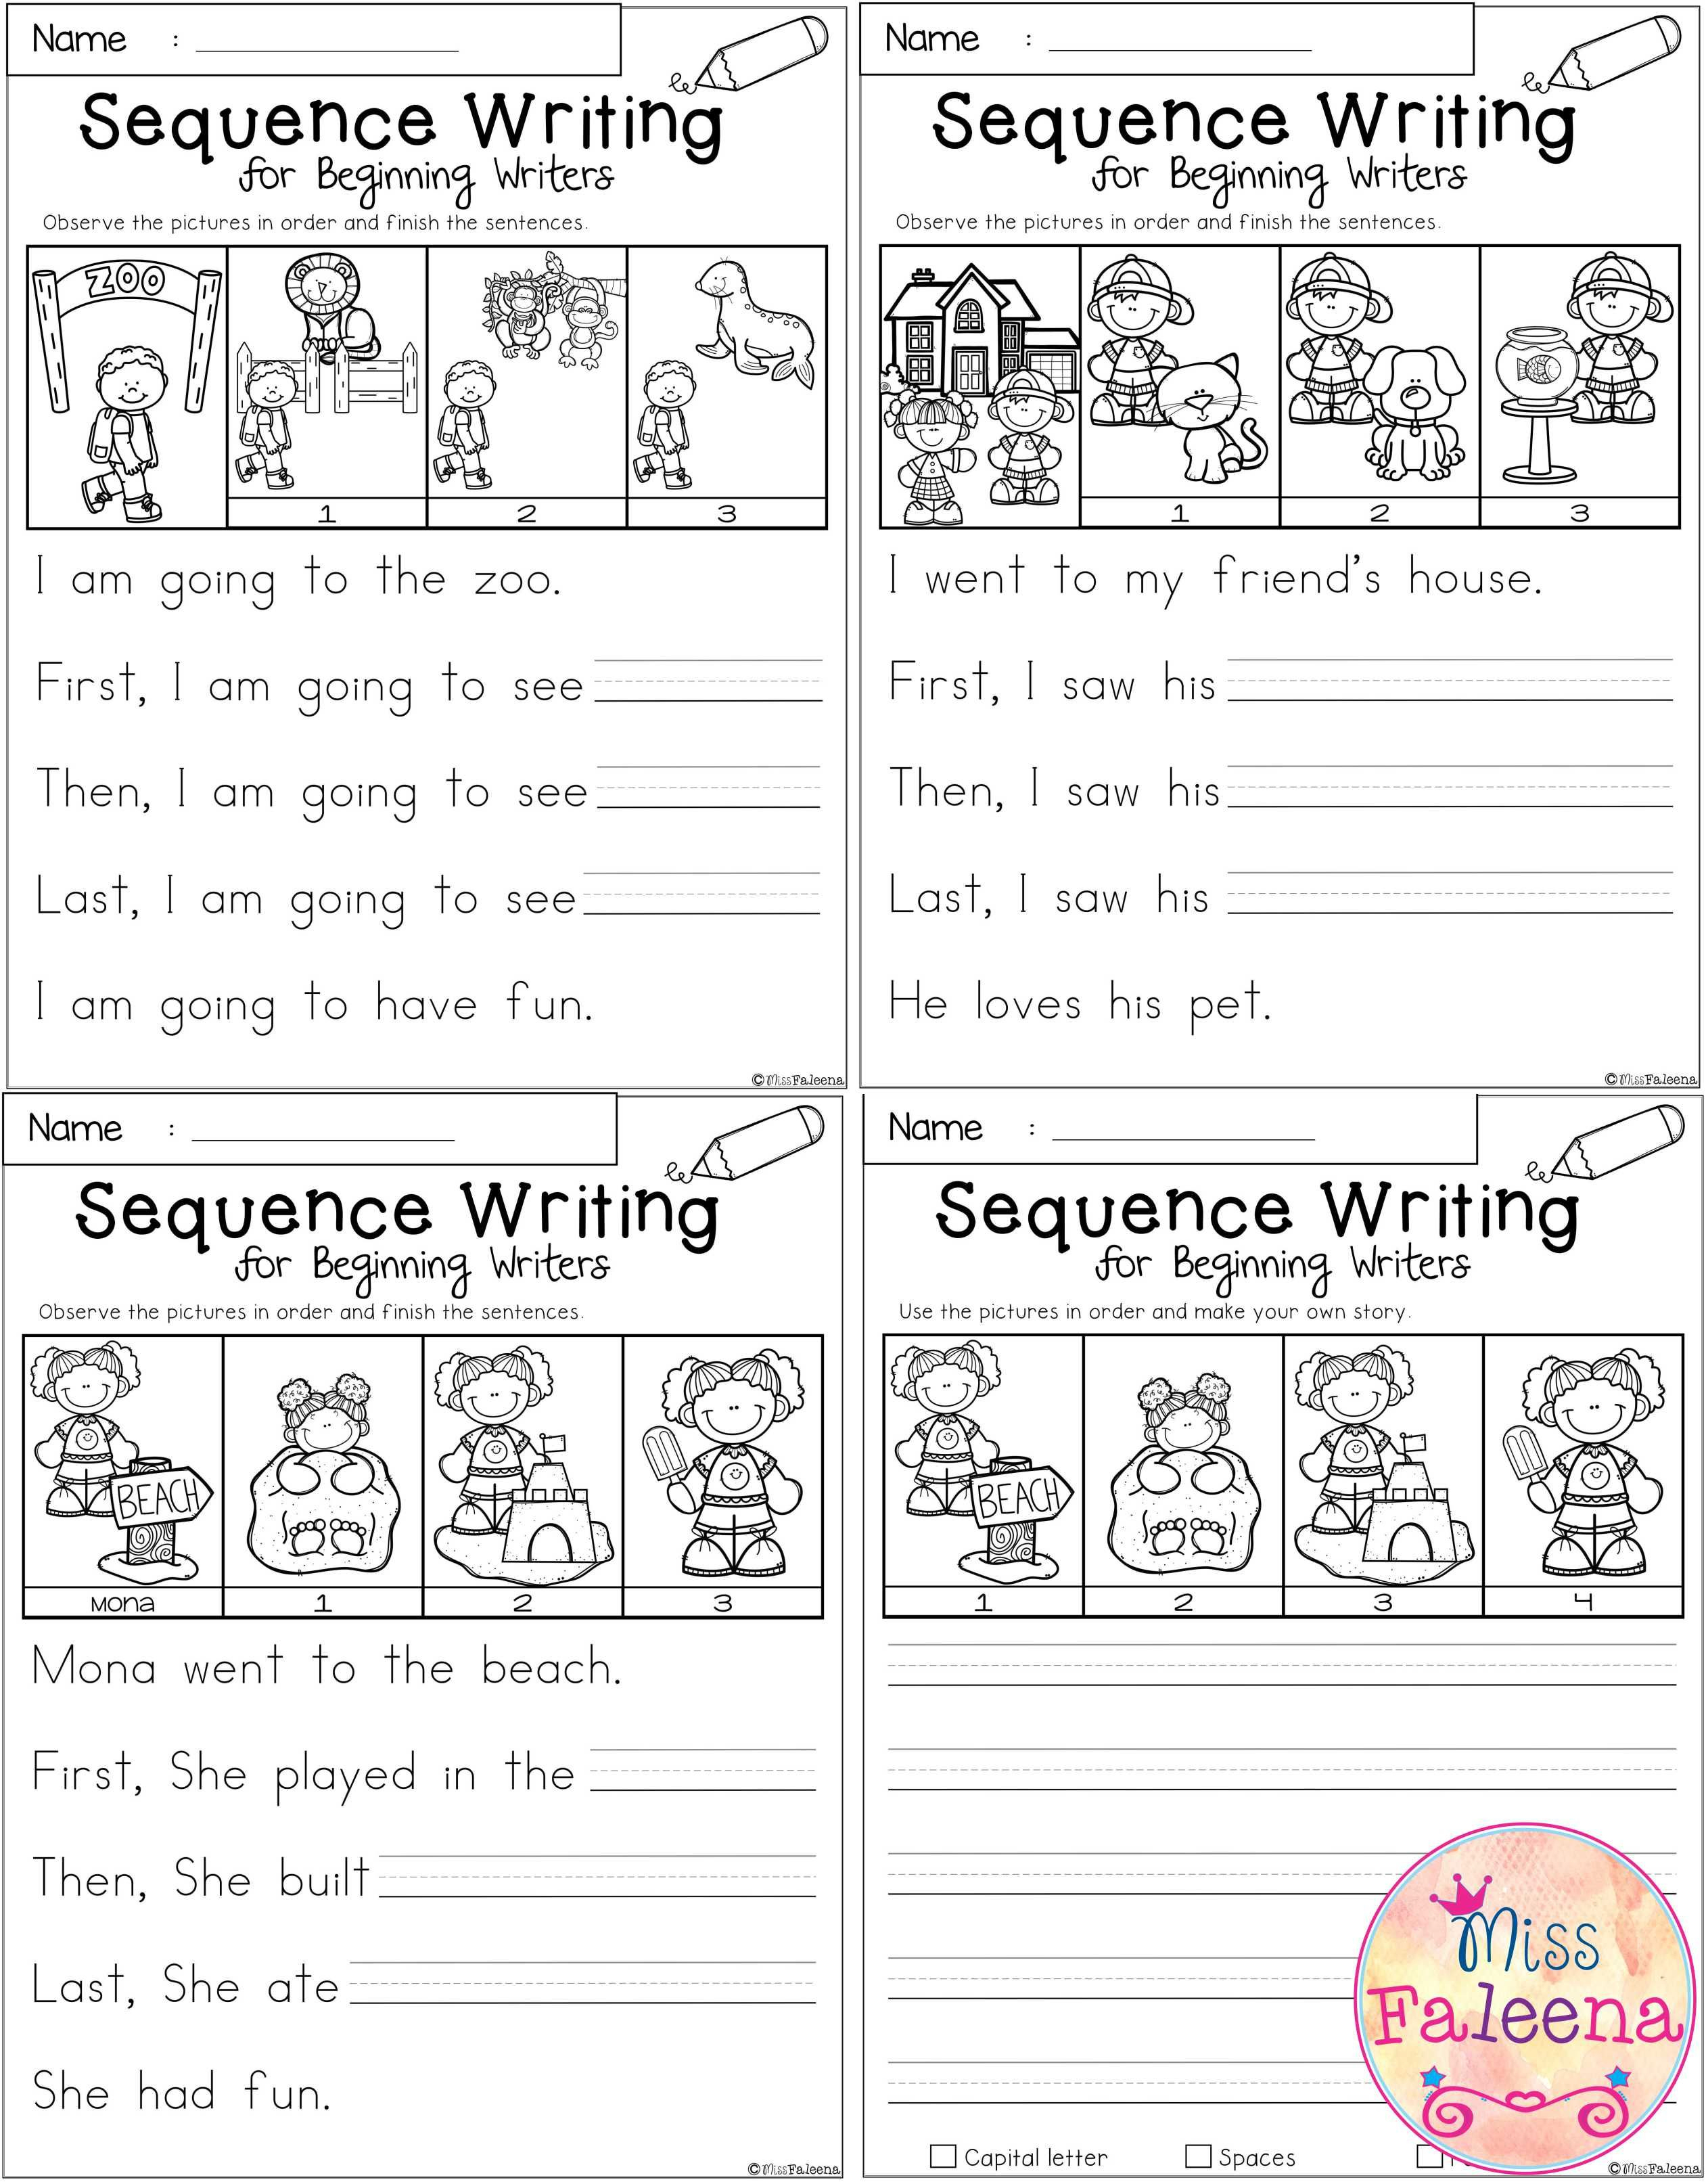 Free Printable Sequencing Worksheets For 1St Grade - Lexia's Blog